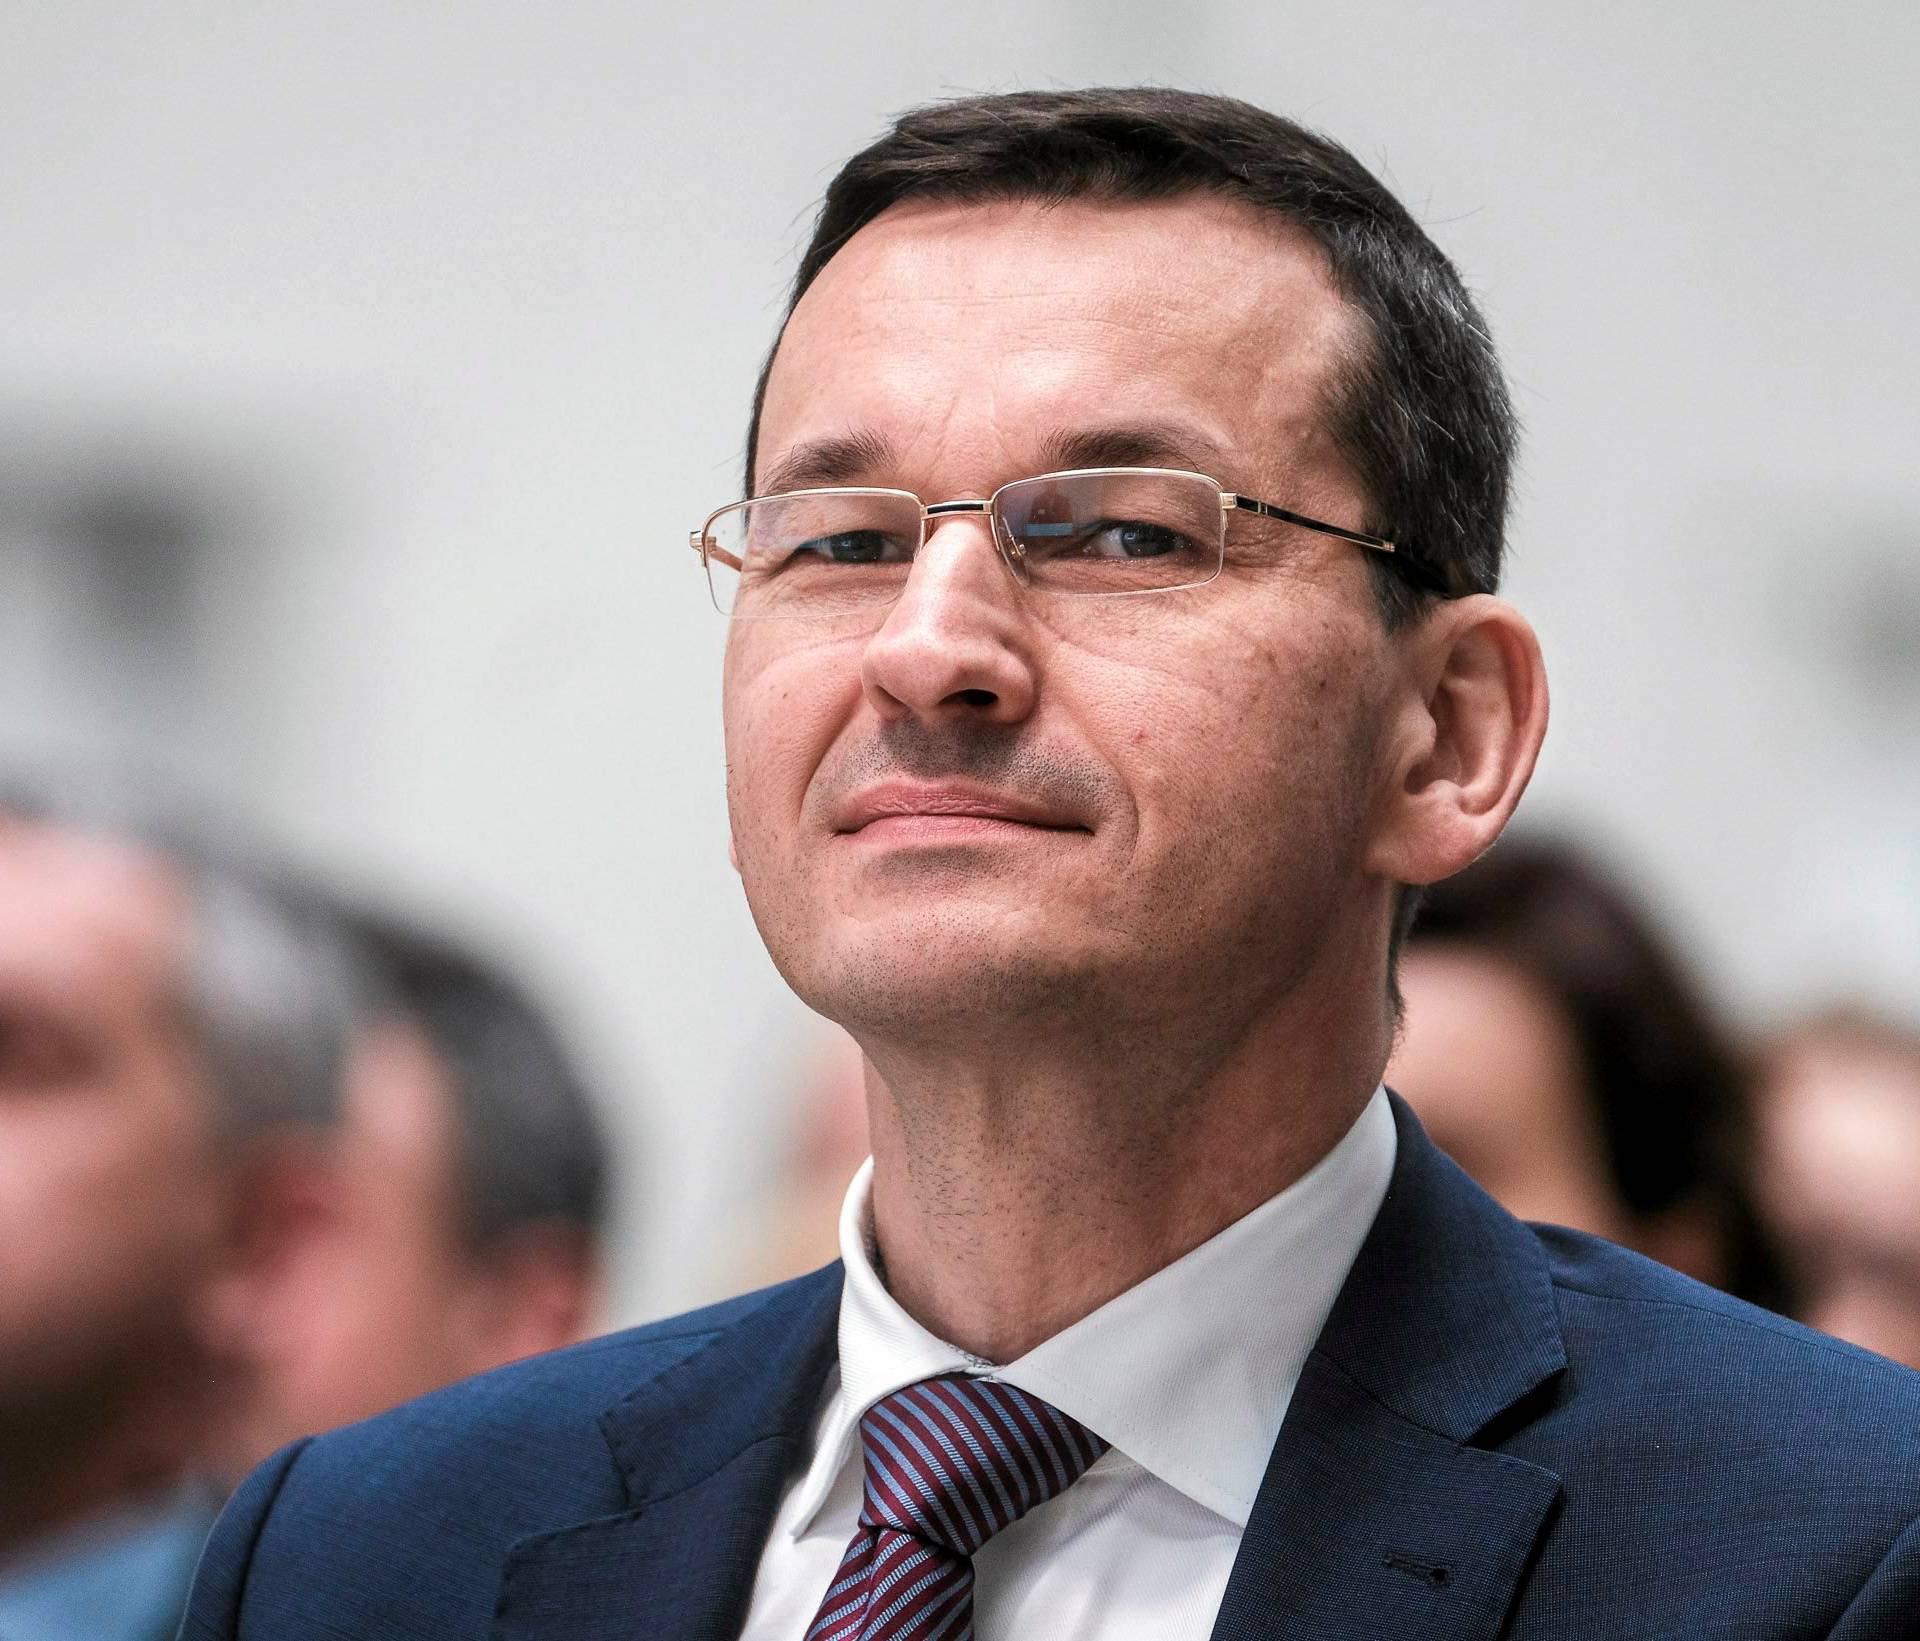 Finance Minister Morawiecki attends an opening ceremony of the Aero Gearbox International factory in Ropczyce